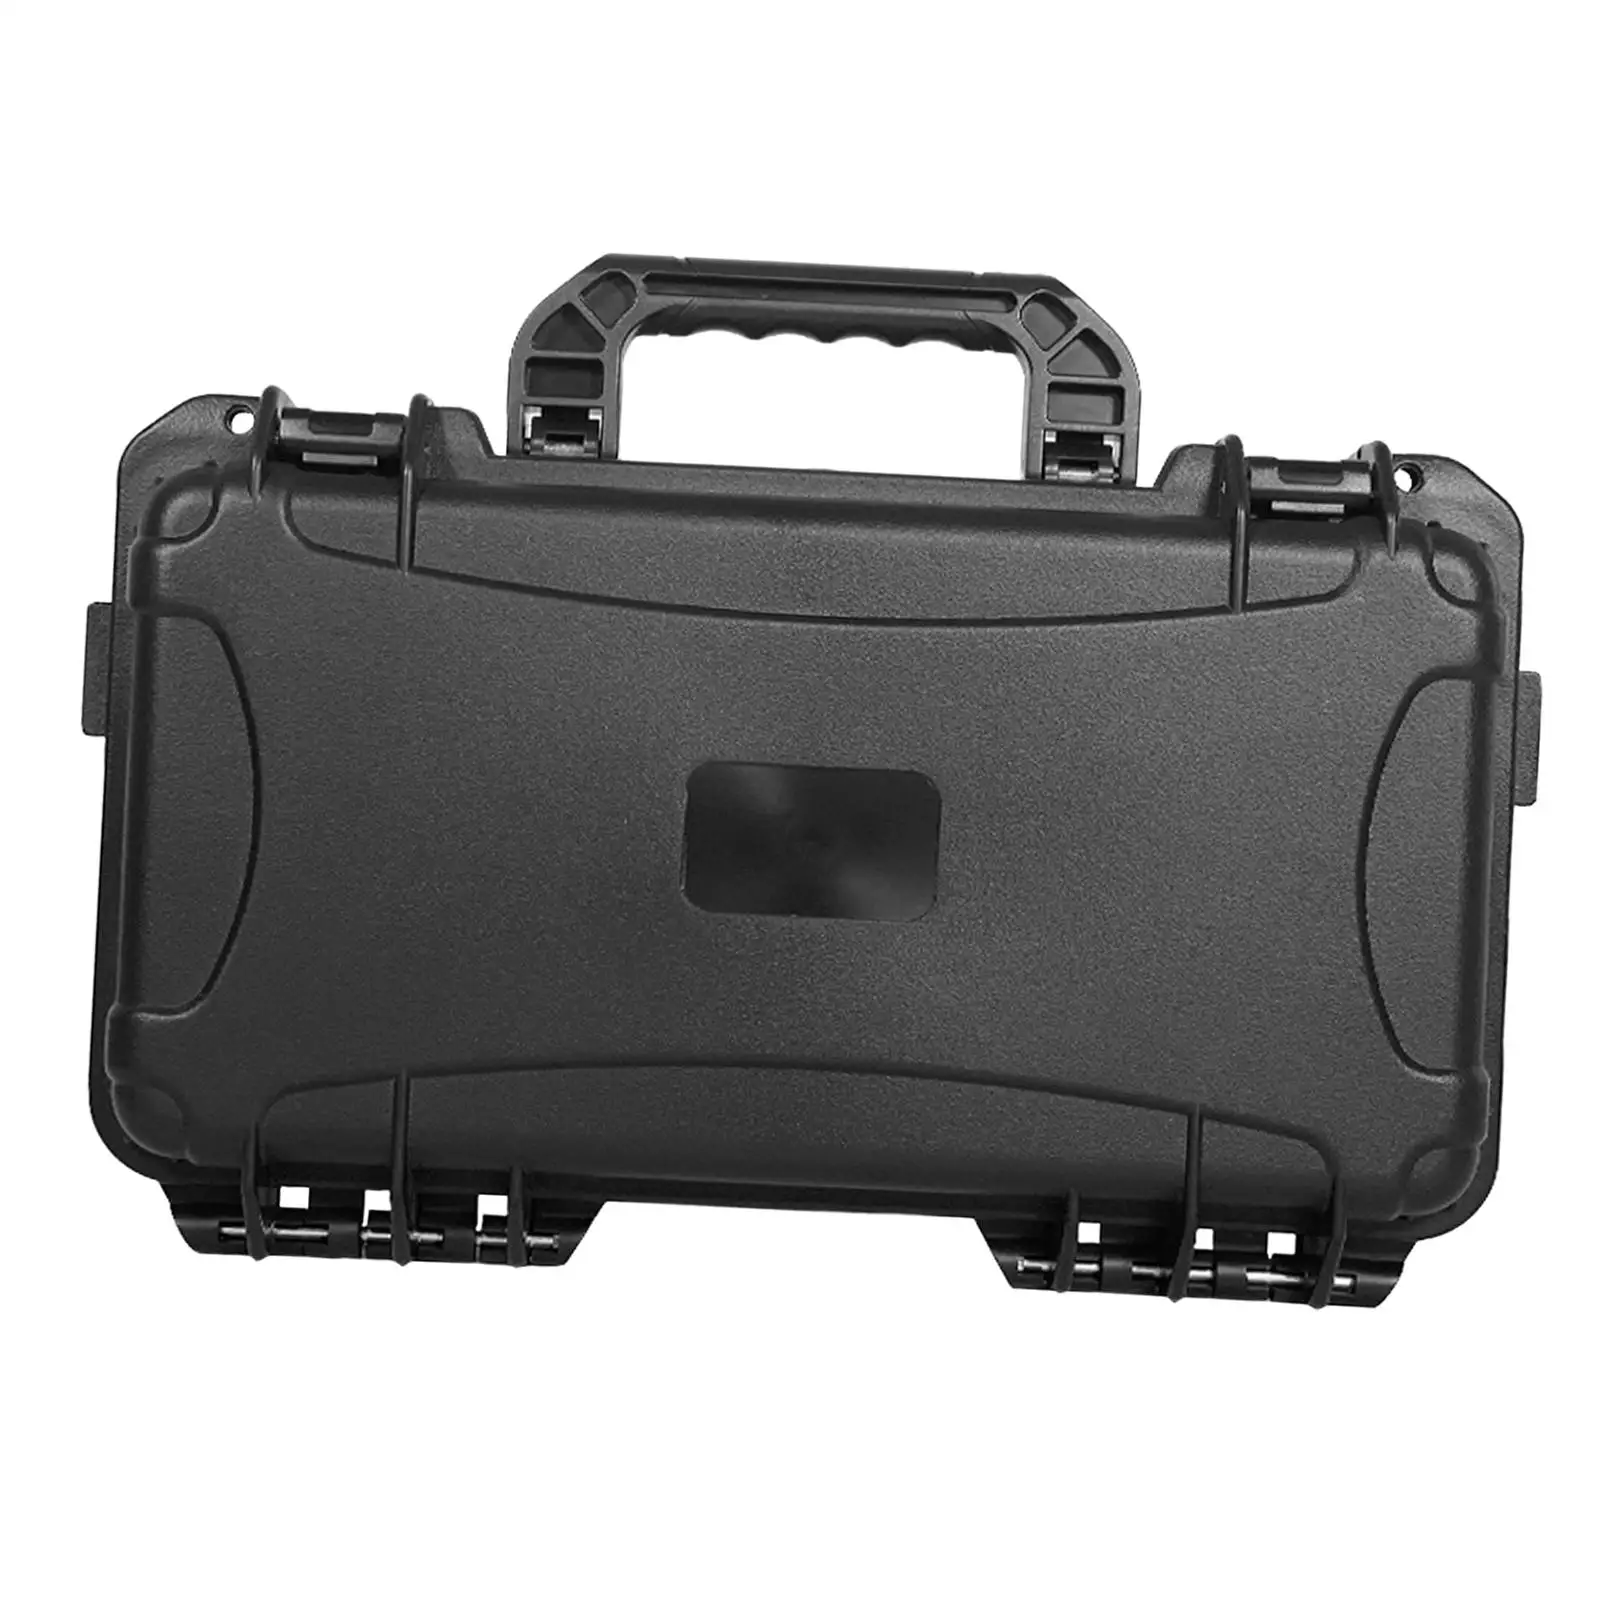 Outdoor Storage Case Outdoor Transport Case Shatterproof Tool Box Sealed Box for Electronics Travel Photographic Equipment Home